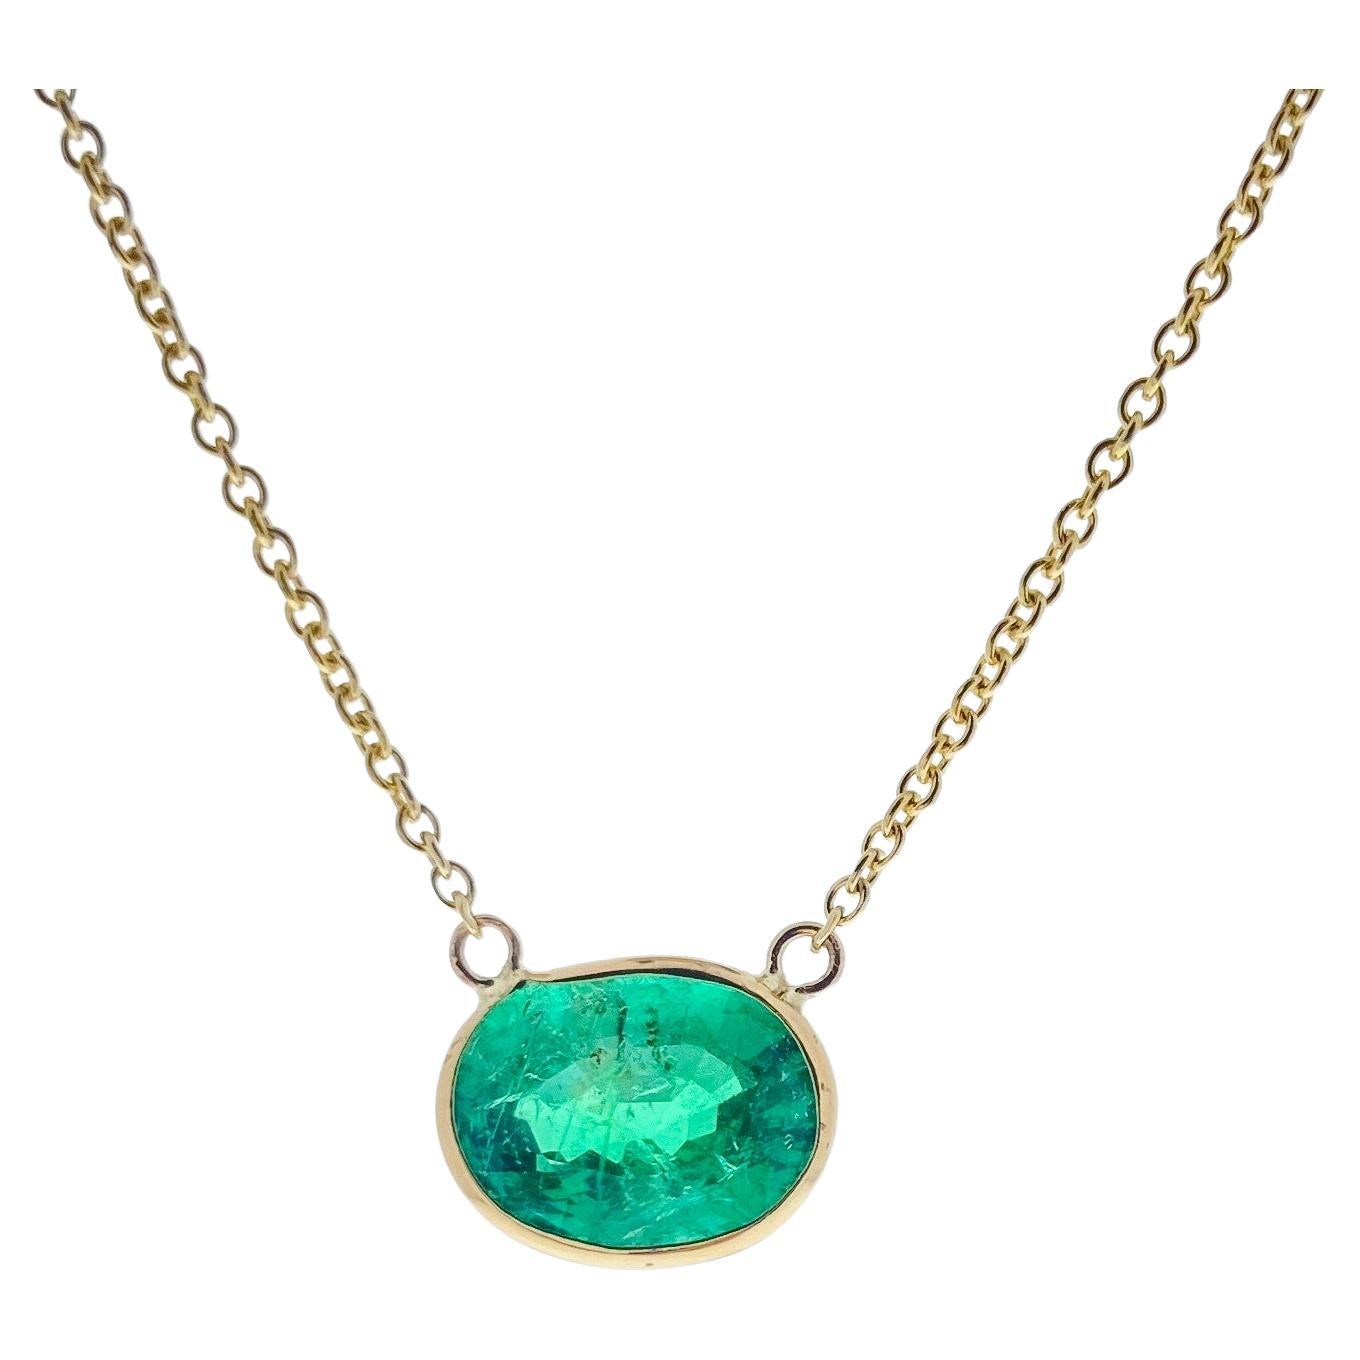 1.96 Carat Green Emerald Oval Cut Fashion Necklaces In 14K Yellow Gold